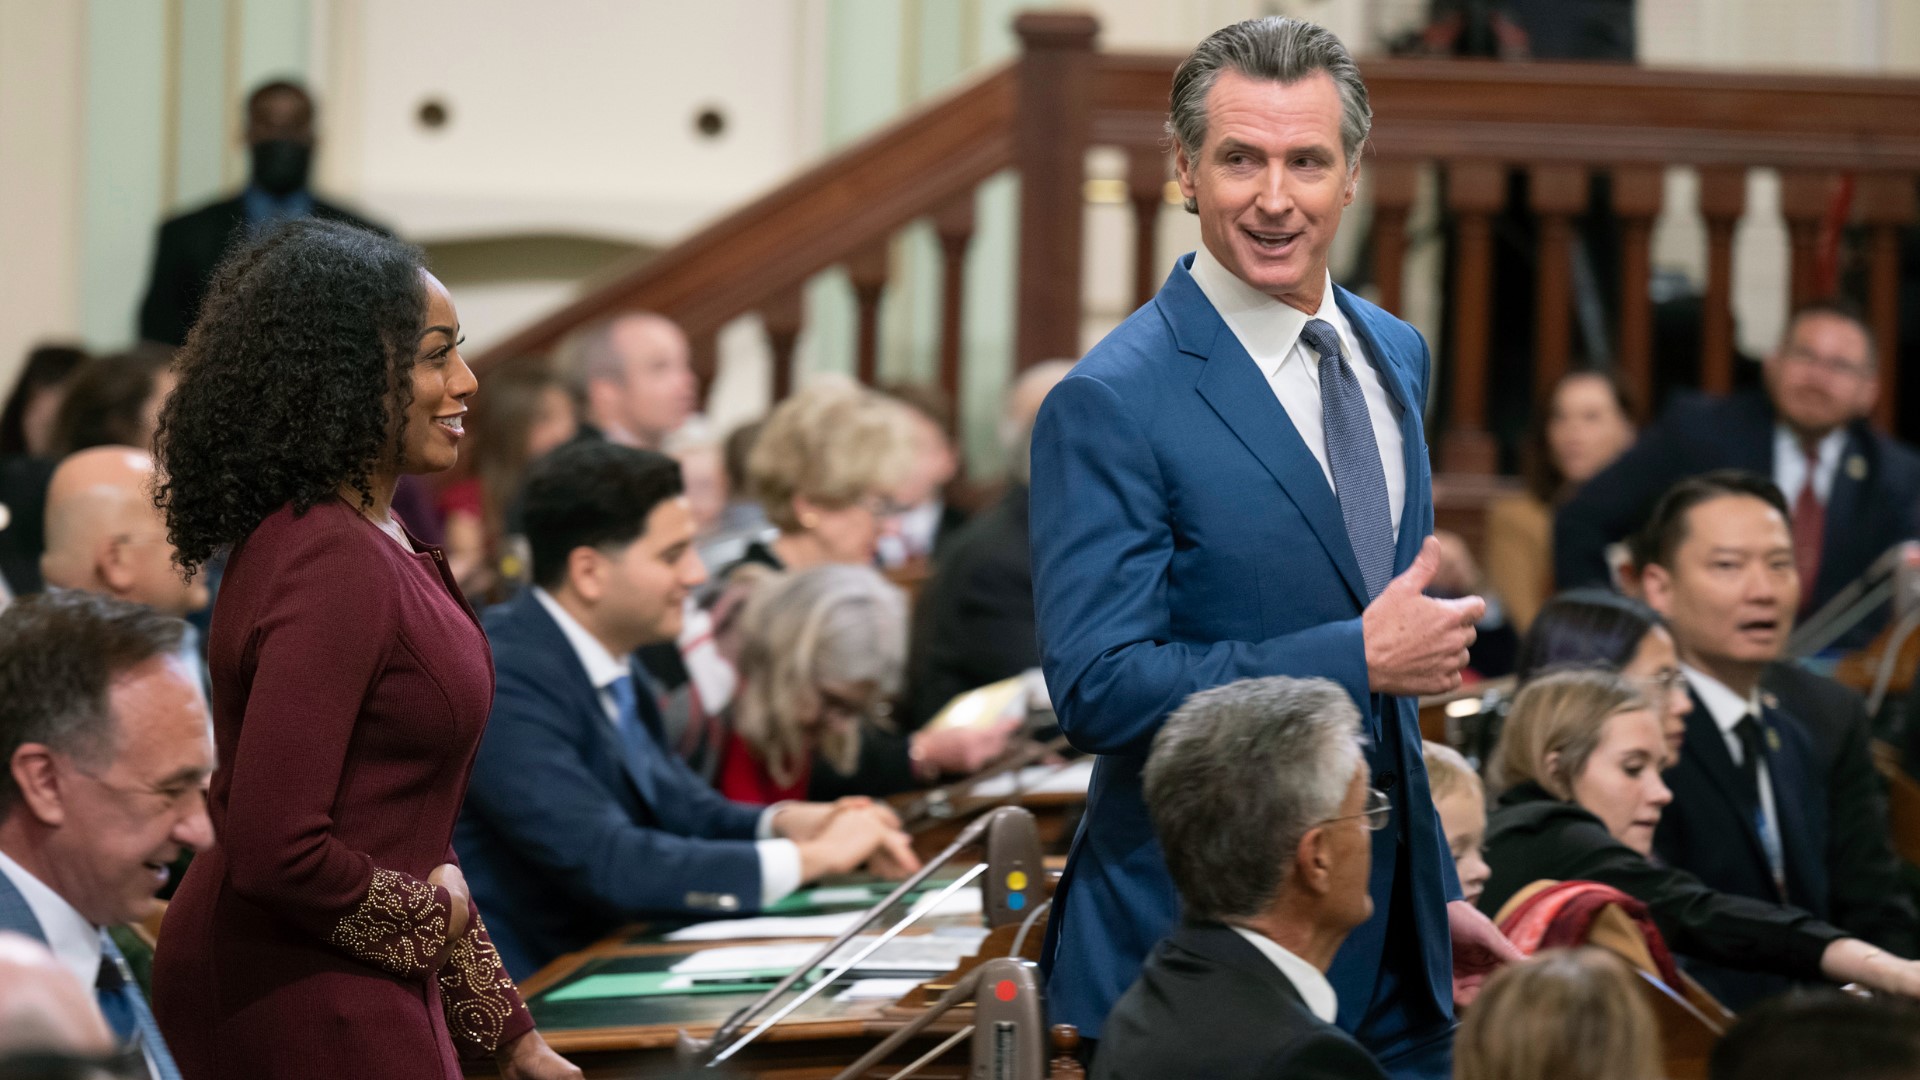 The "extraordinary session" of the California Legislature lasted just 3 minutes, but lawmakers got together to hear Gov. Newsom's proposals to tax oil companies